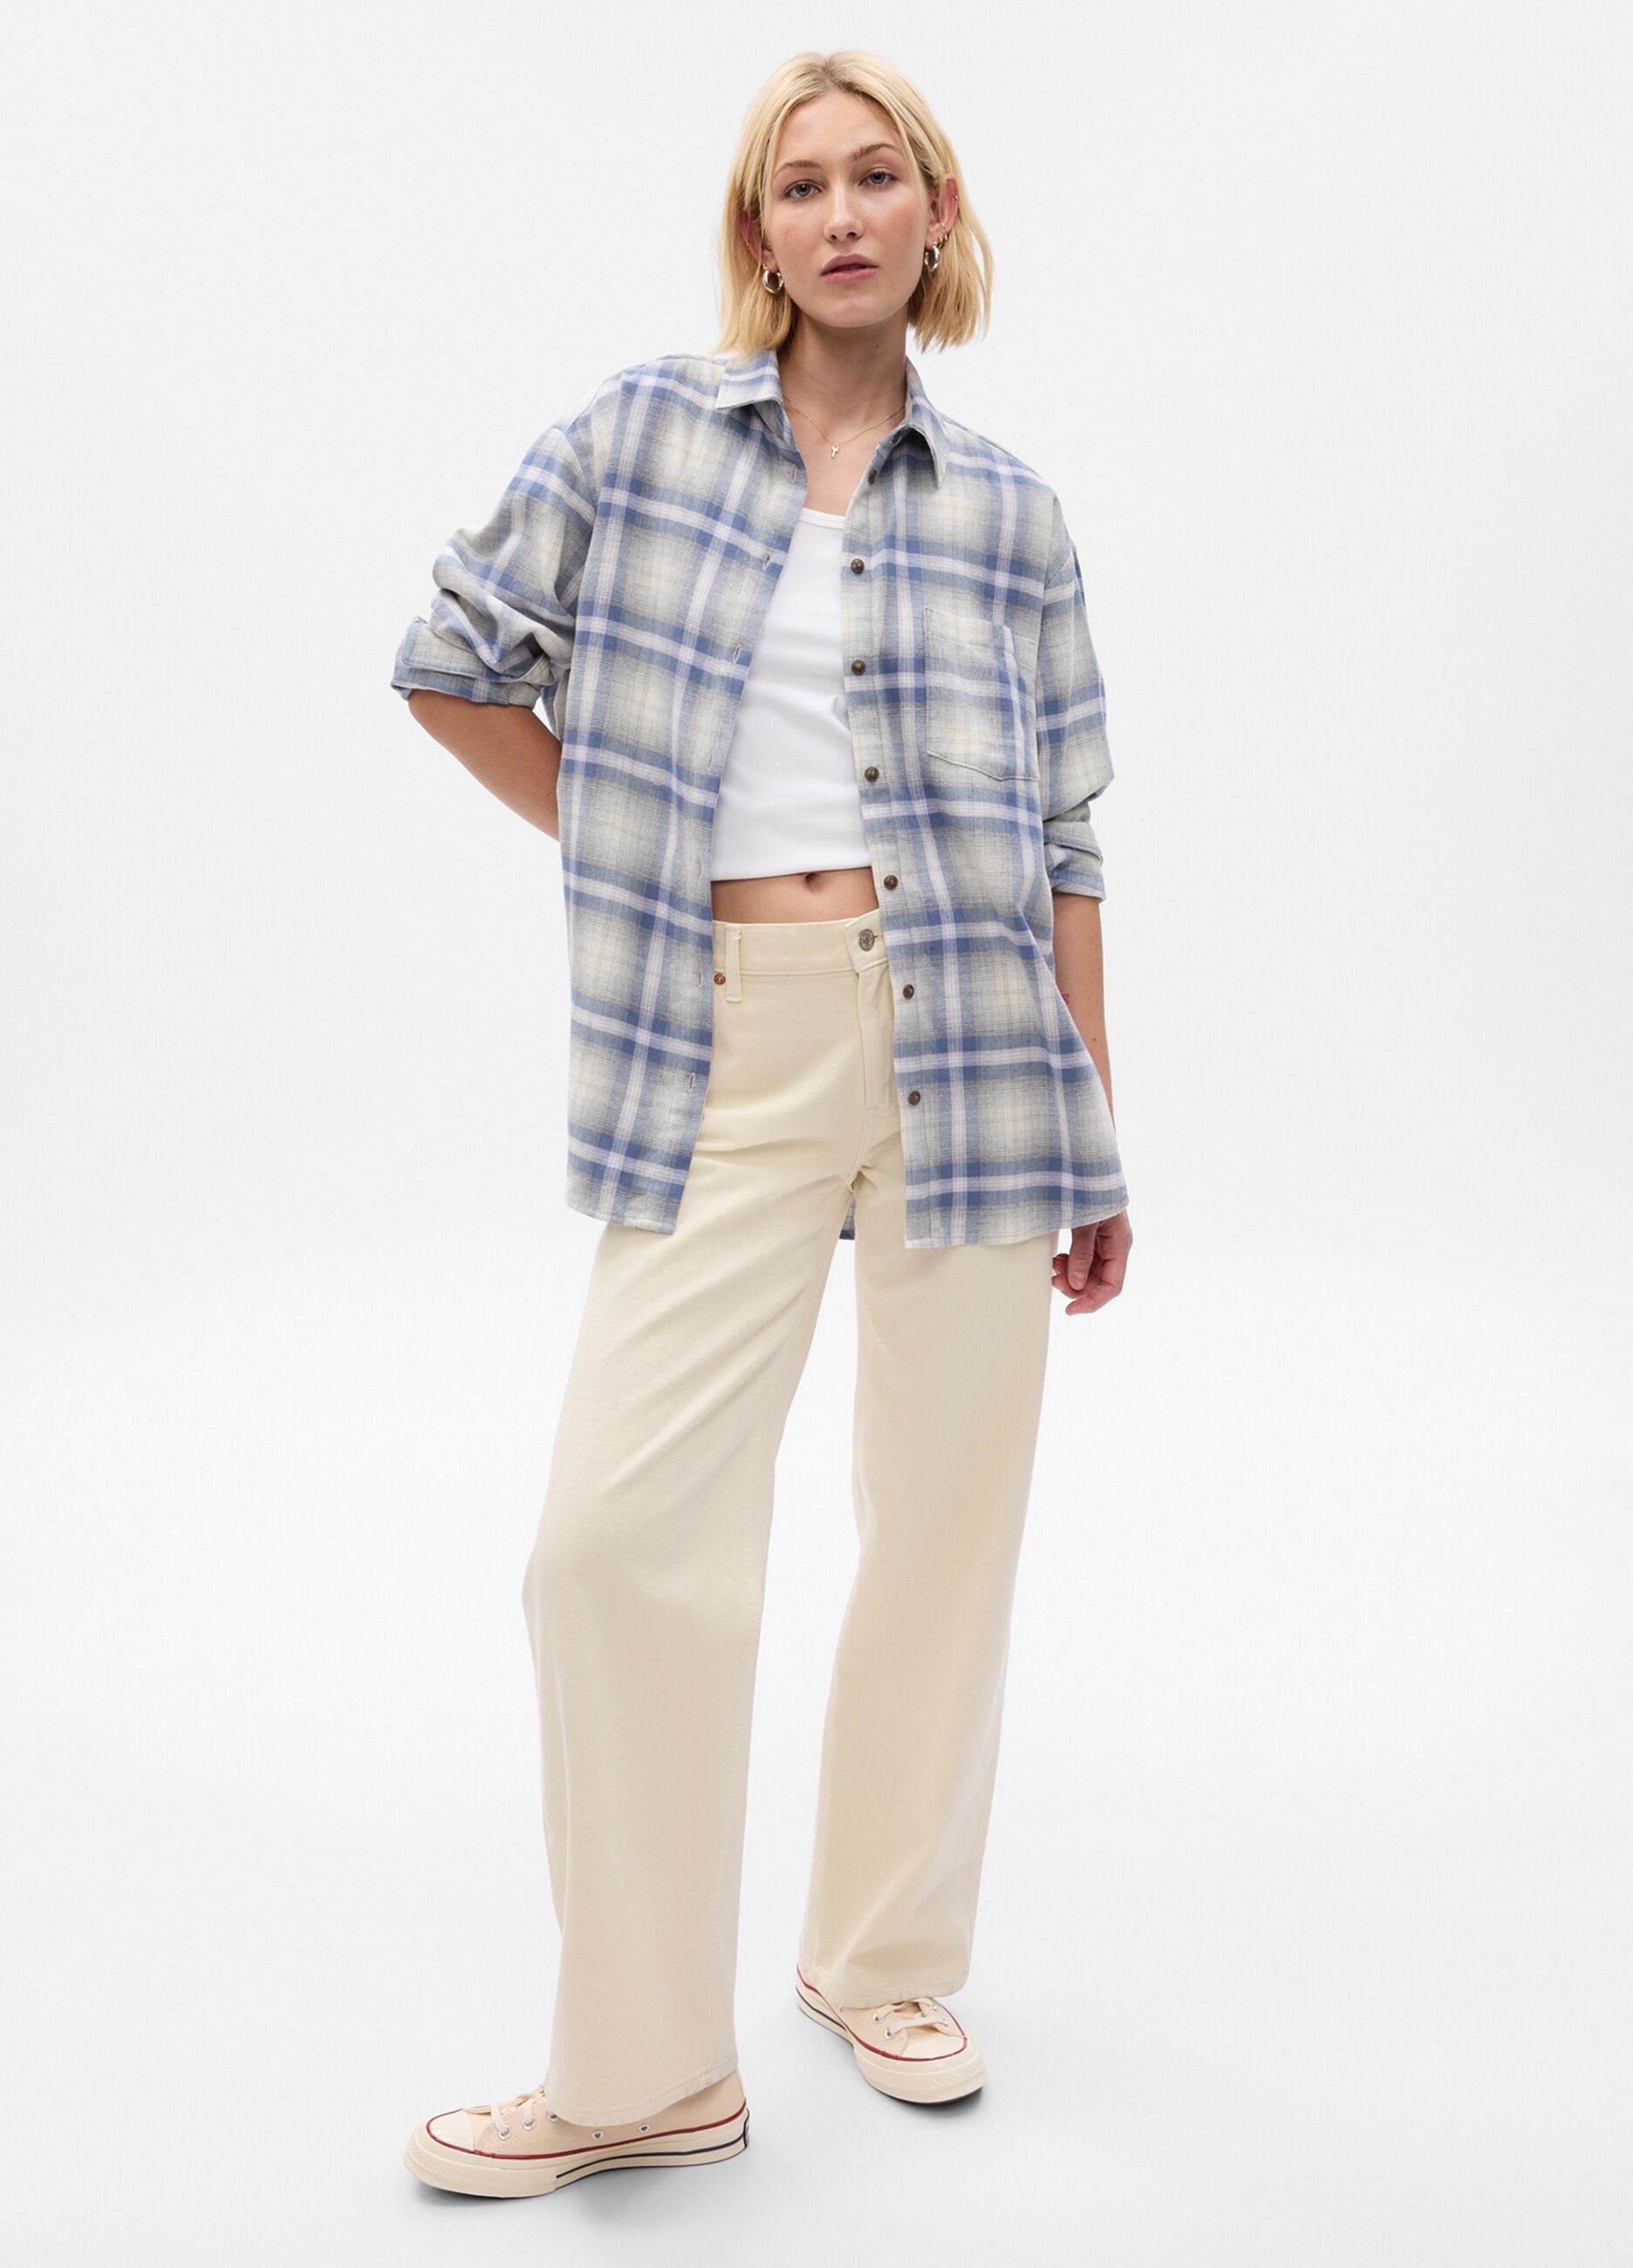 Oversized shirt in flannel with check pattern